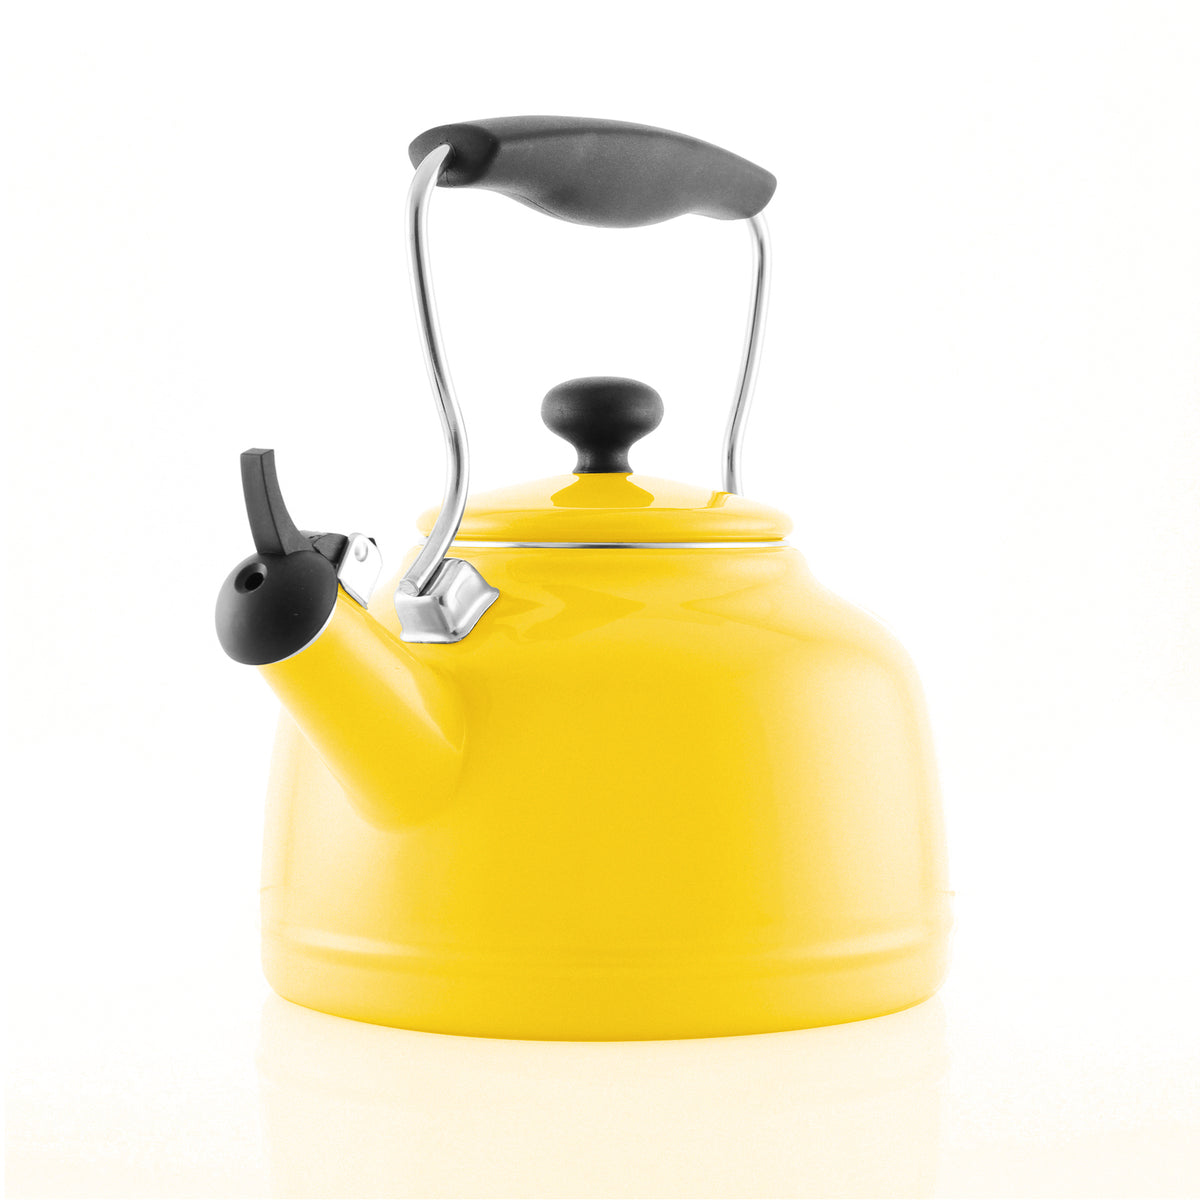 Wooden Handle Yellow Teapot,Whistling Cute Tea Kettle